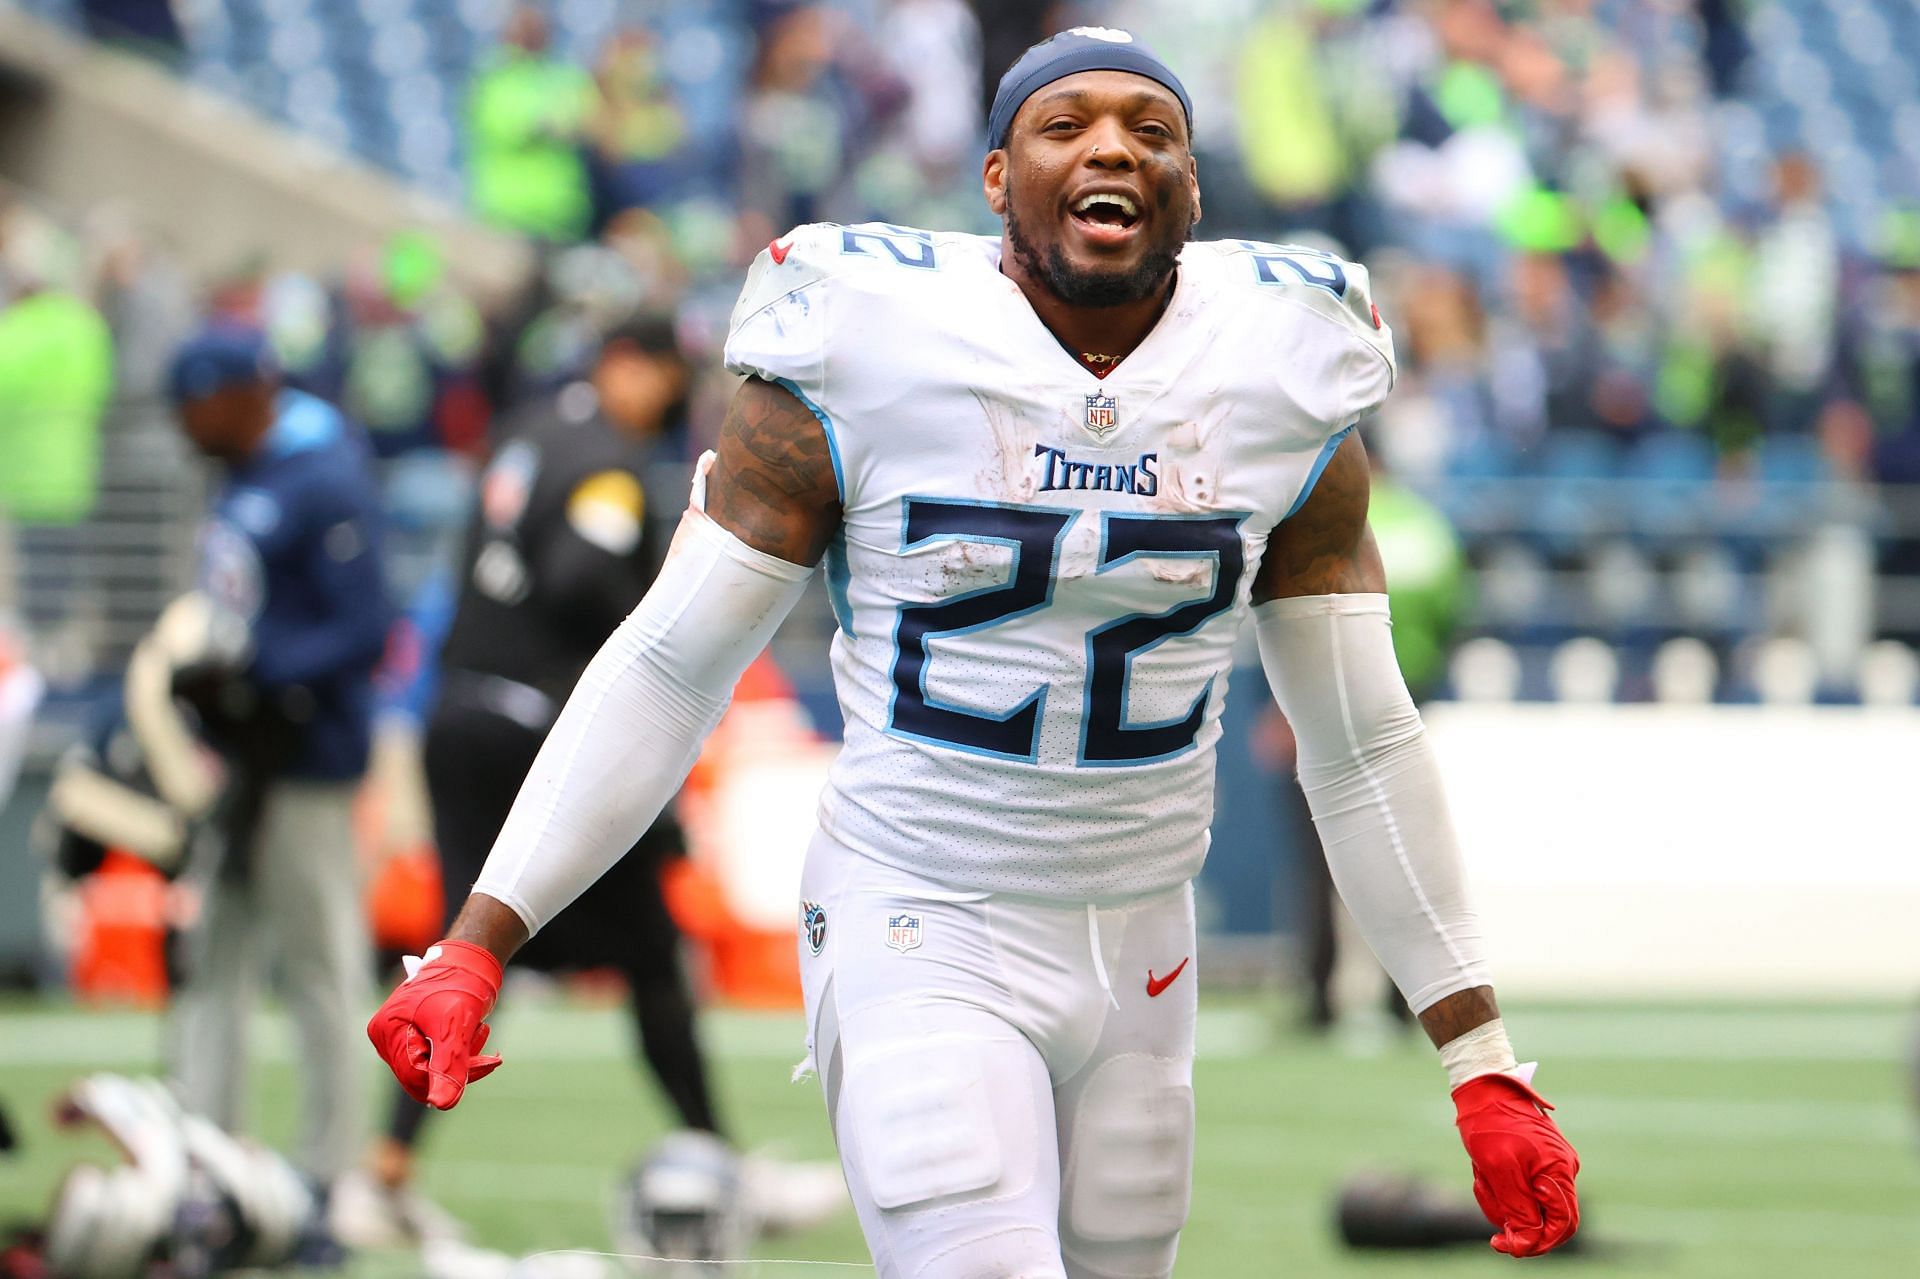 3 NFL players who could win Comeback Player of the Year for 2022 season feat. Derrick Henry